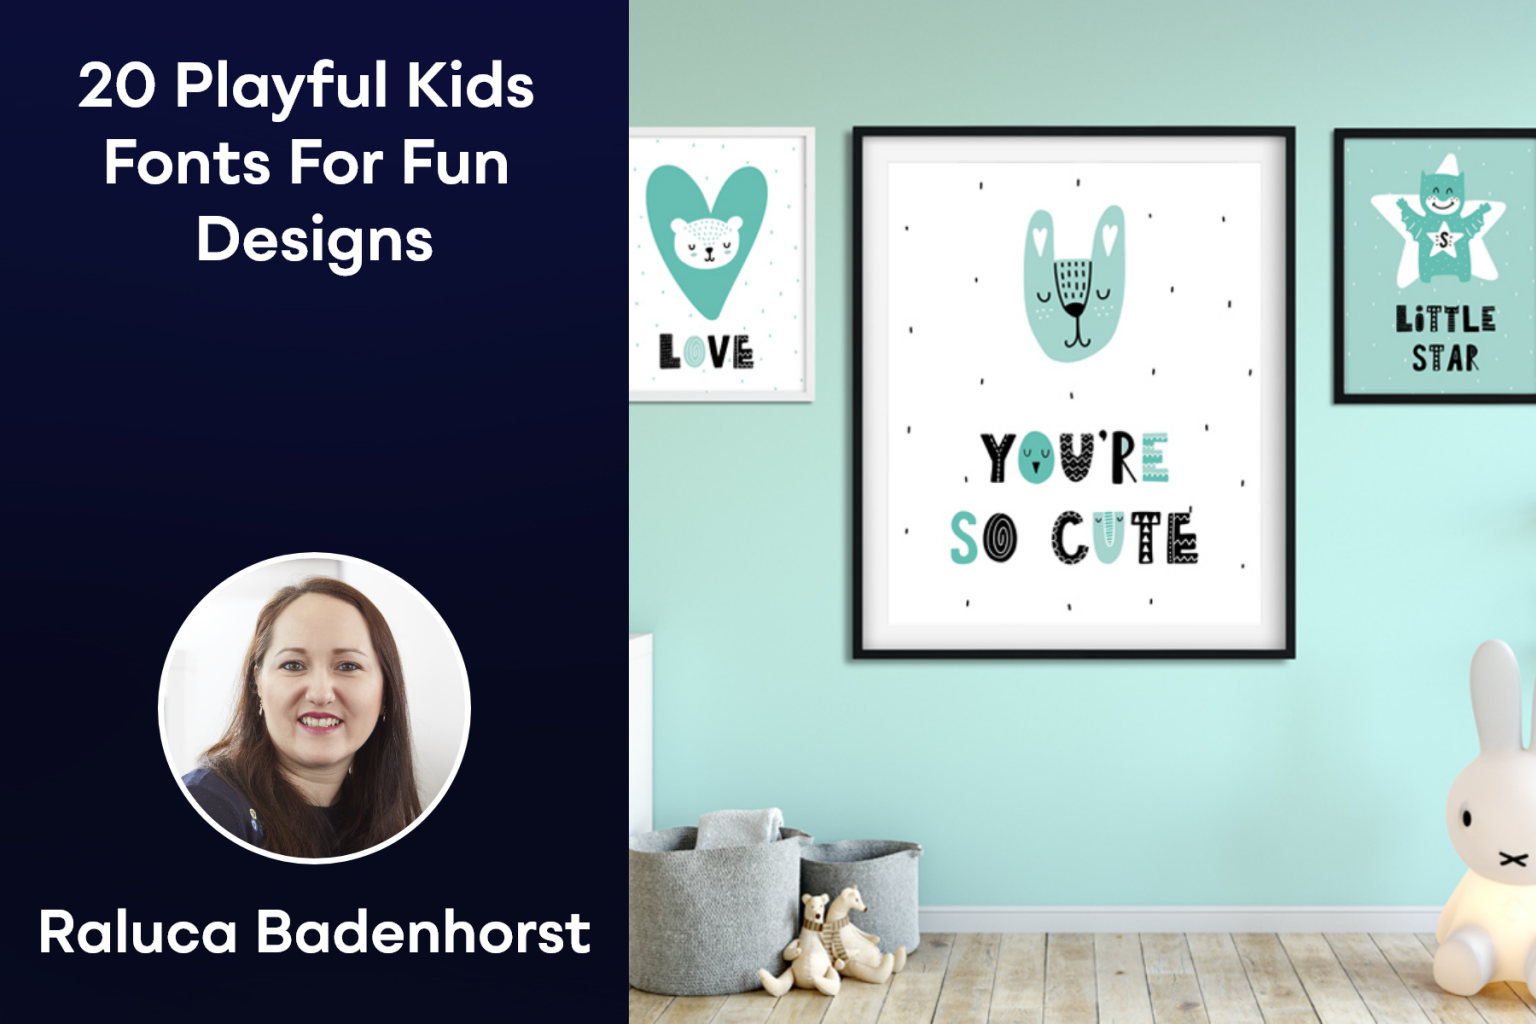 20 Playful Kids Fonts for Fun Designs